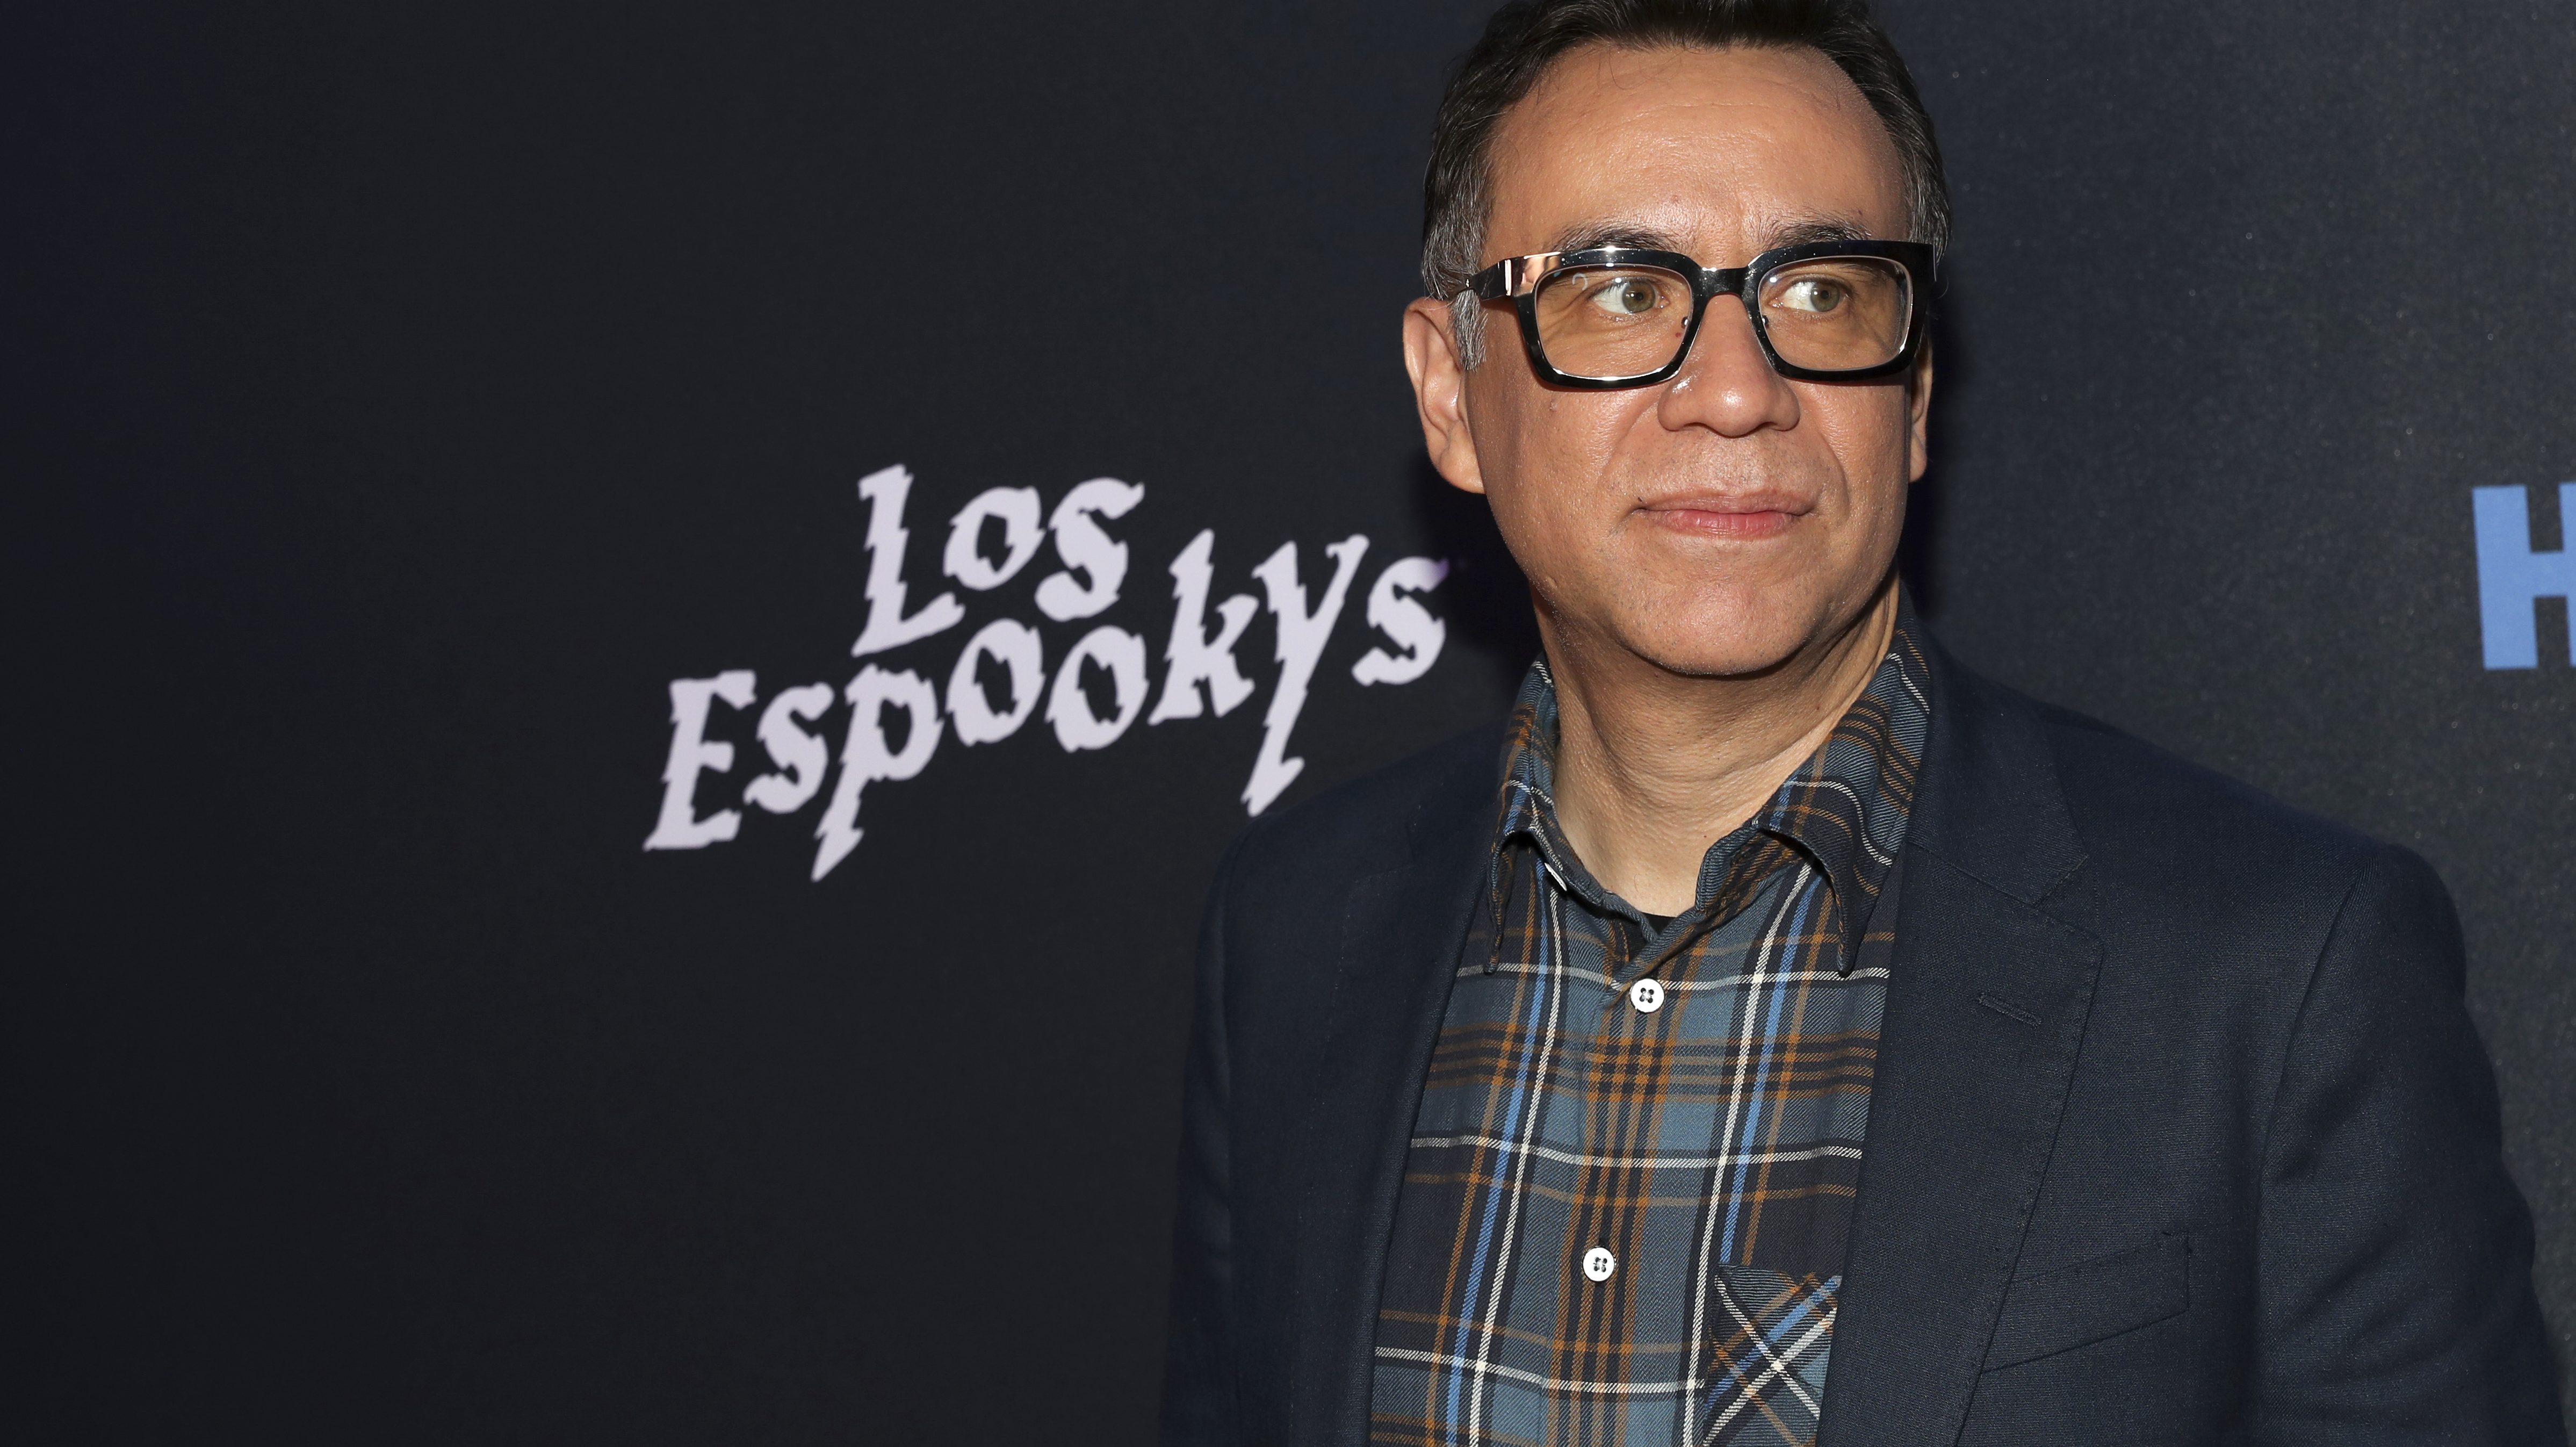 Los Espookys Season 1, Official Website for the HBO Series